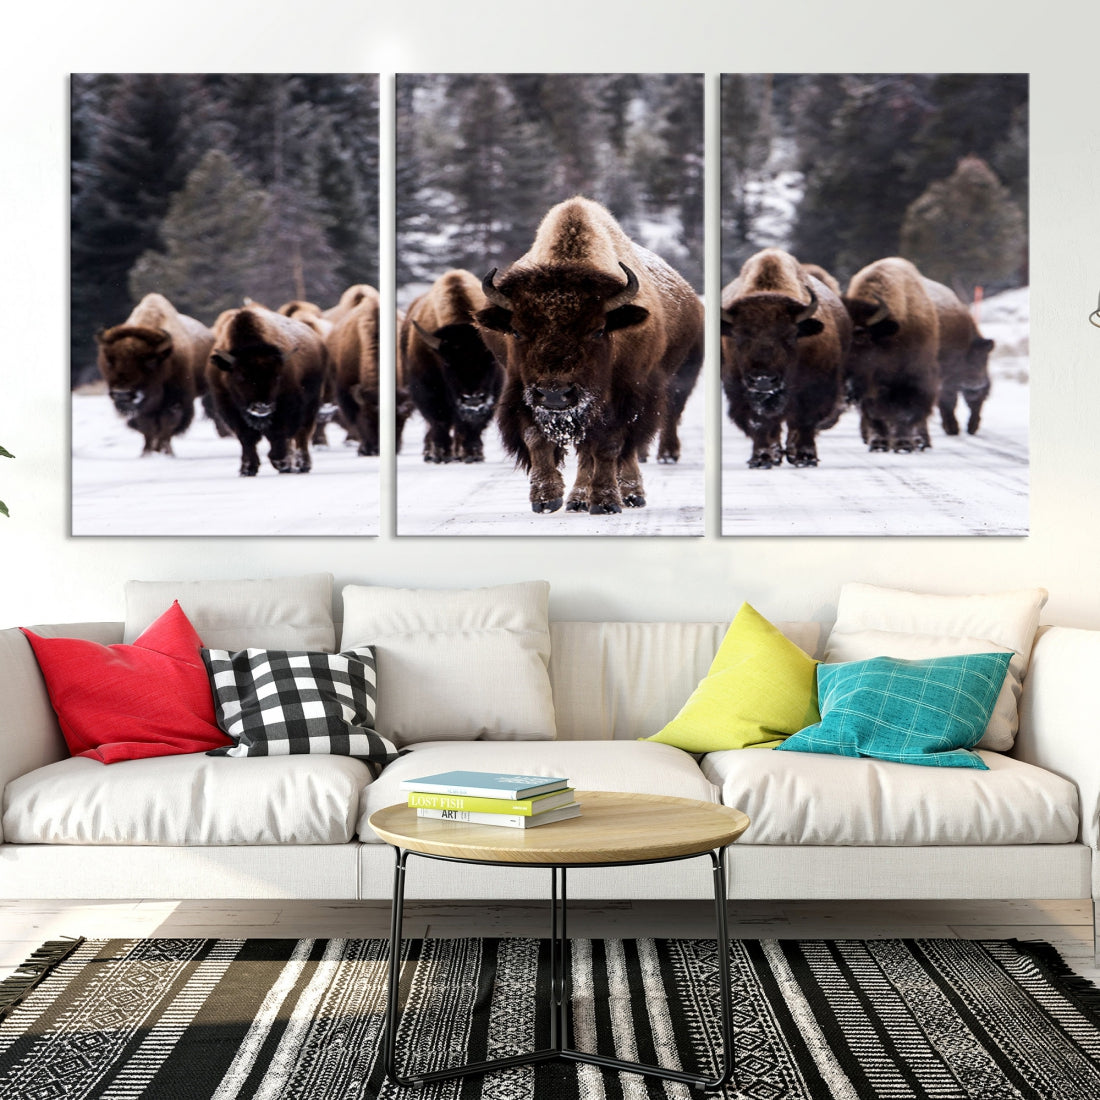 Celebrate Family & Winter with Our Buffalo Wall Art Canvas PrintA Rustic & Cozy Addition to Your Home Decor